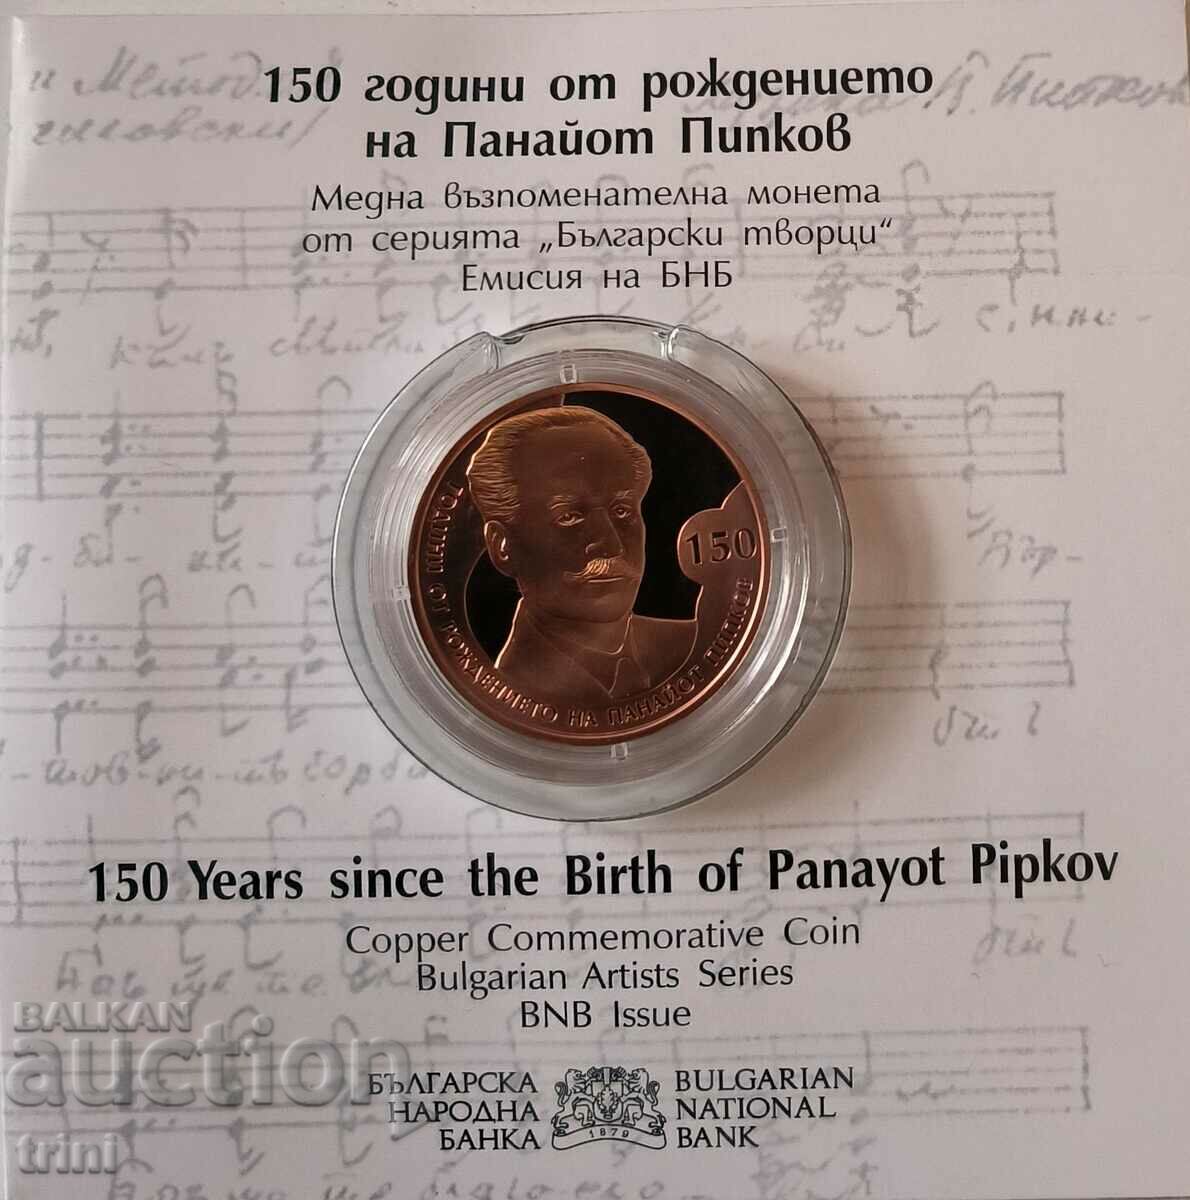 BGN 2 2021 year 150 from the birth of Panayot Pipkov